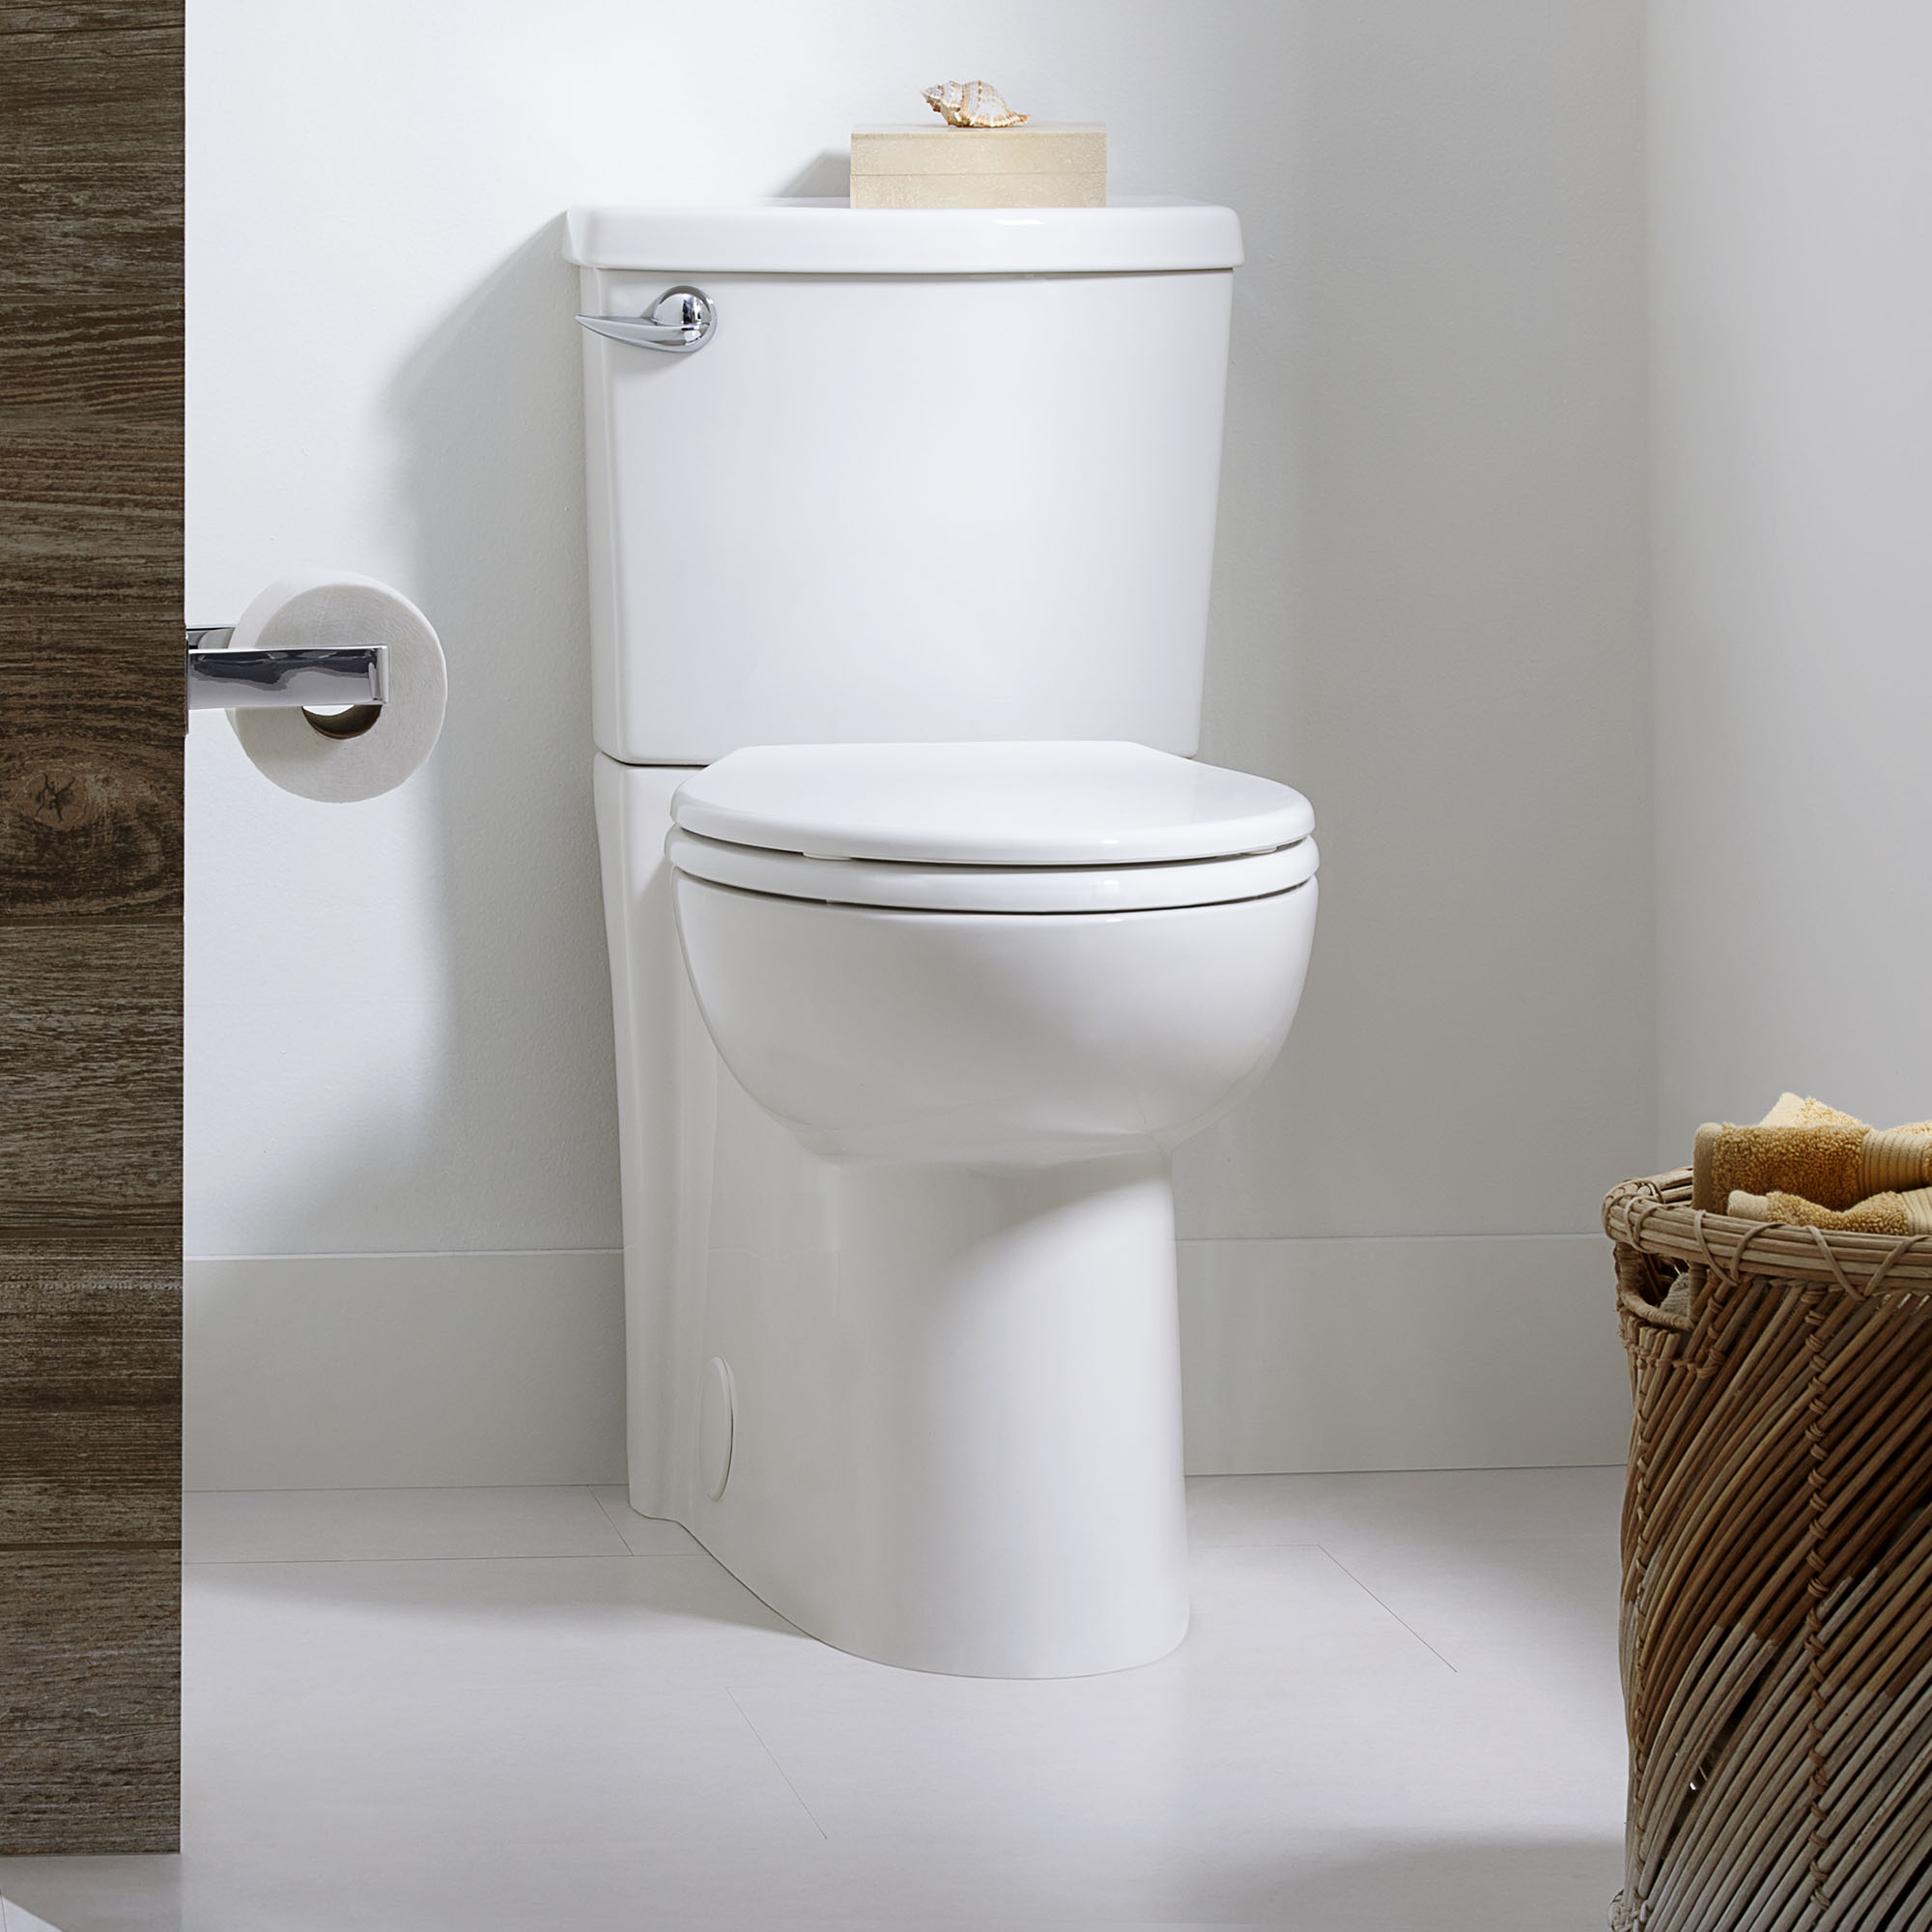 Cadet®3 FloWise Skirted Two-Piece 1.28 gpf/4.8 Lpf Chair Height Elongated  Toilet With Seat